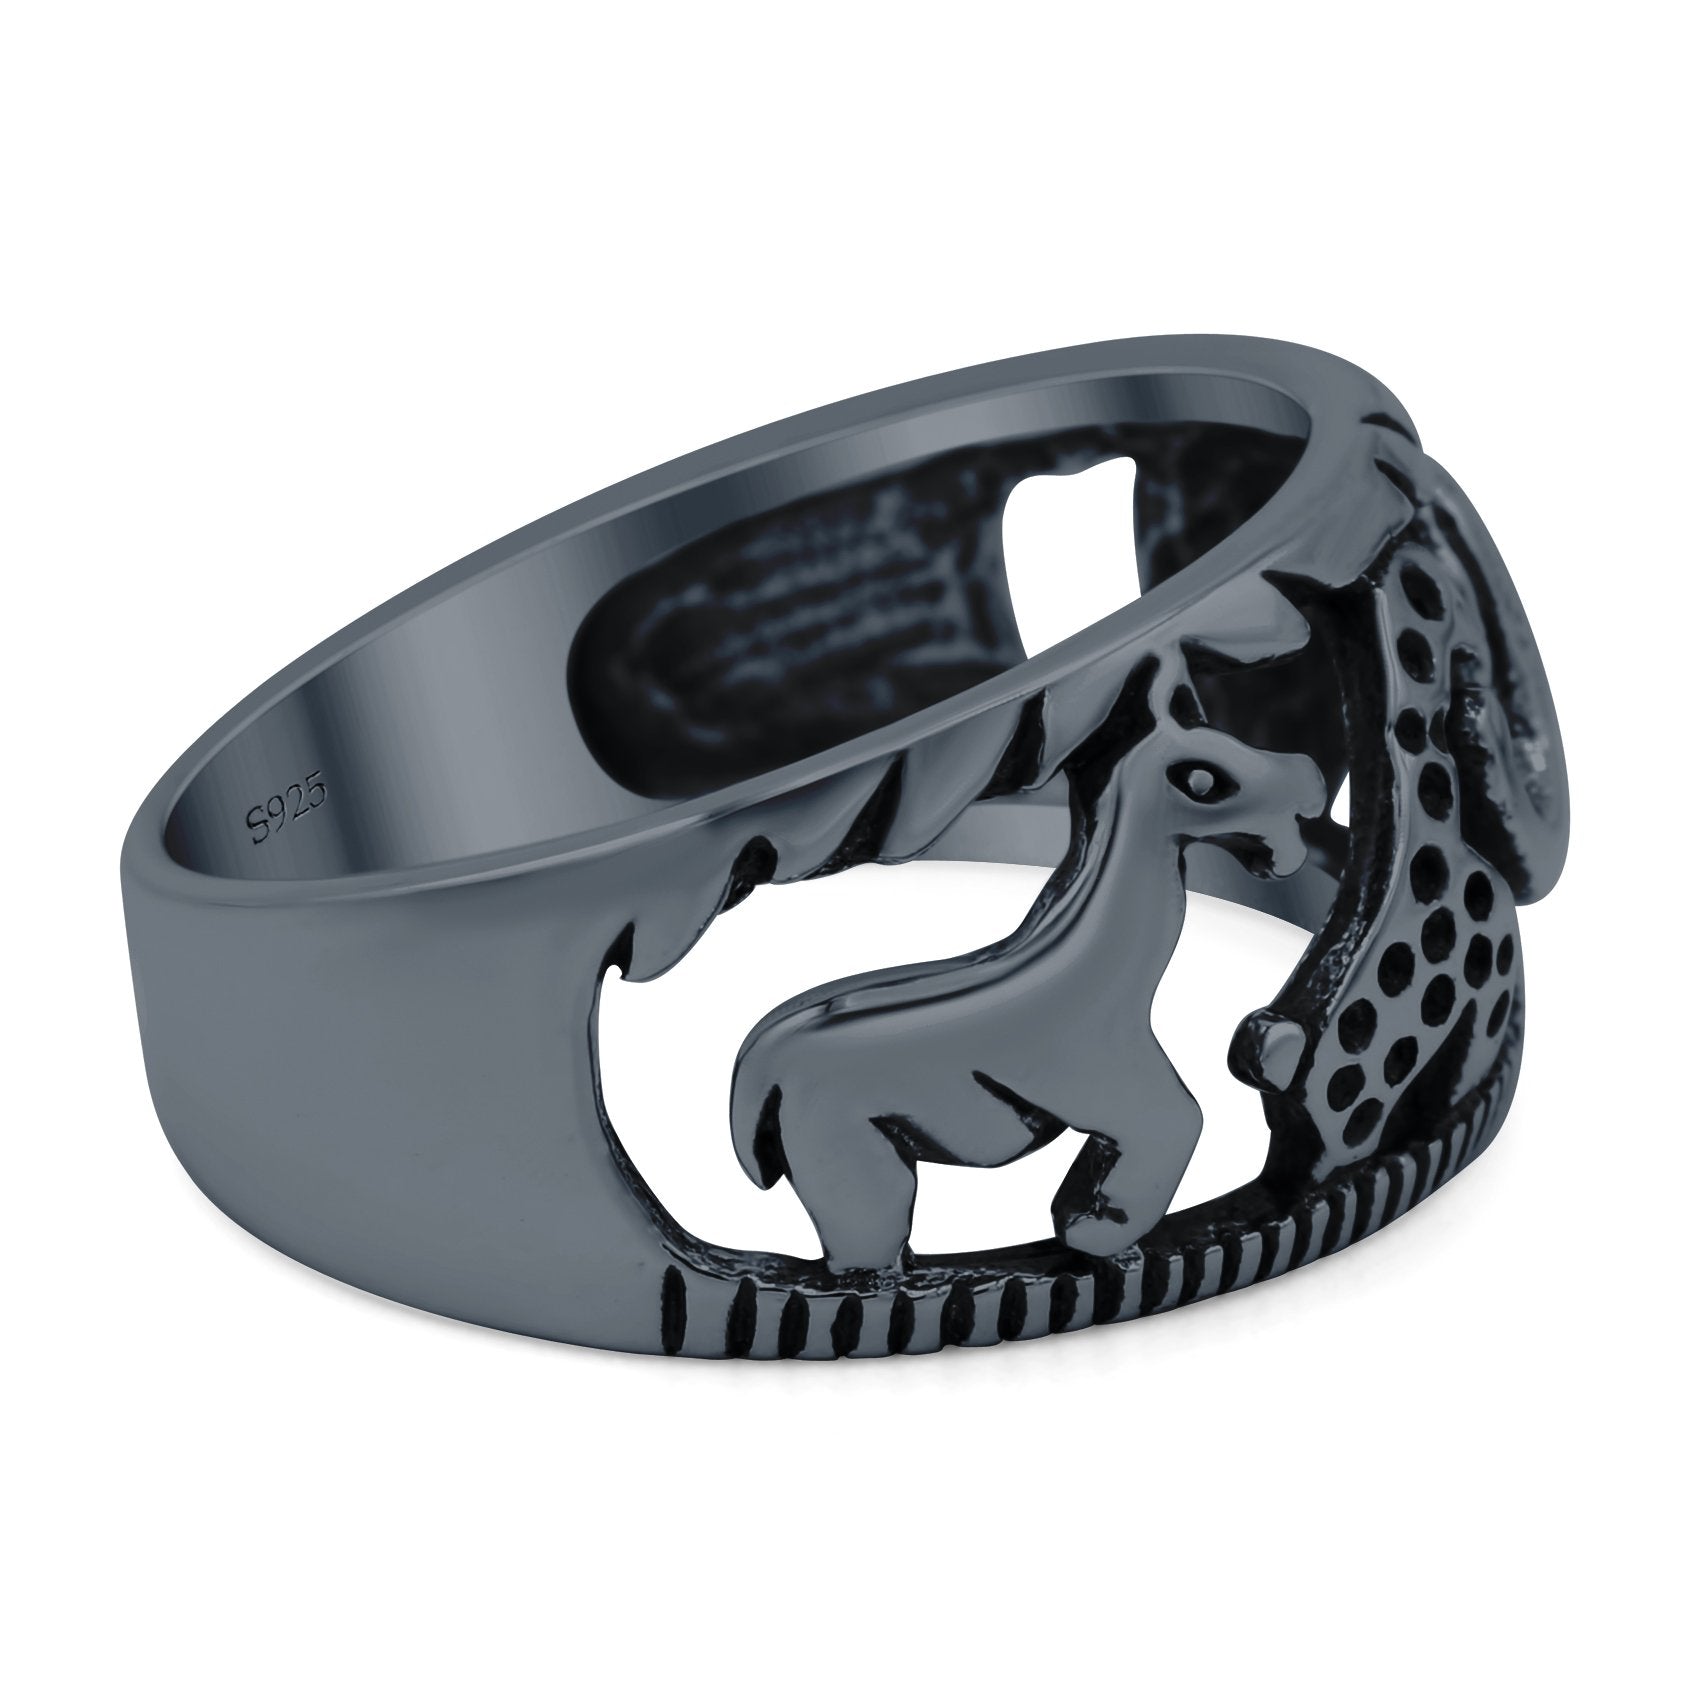 Animals Ring Oxidized Band Solid 925 Sterling Silver Thumb Ring (10mm)